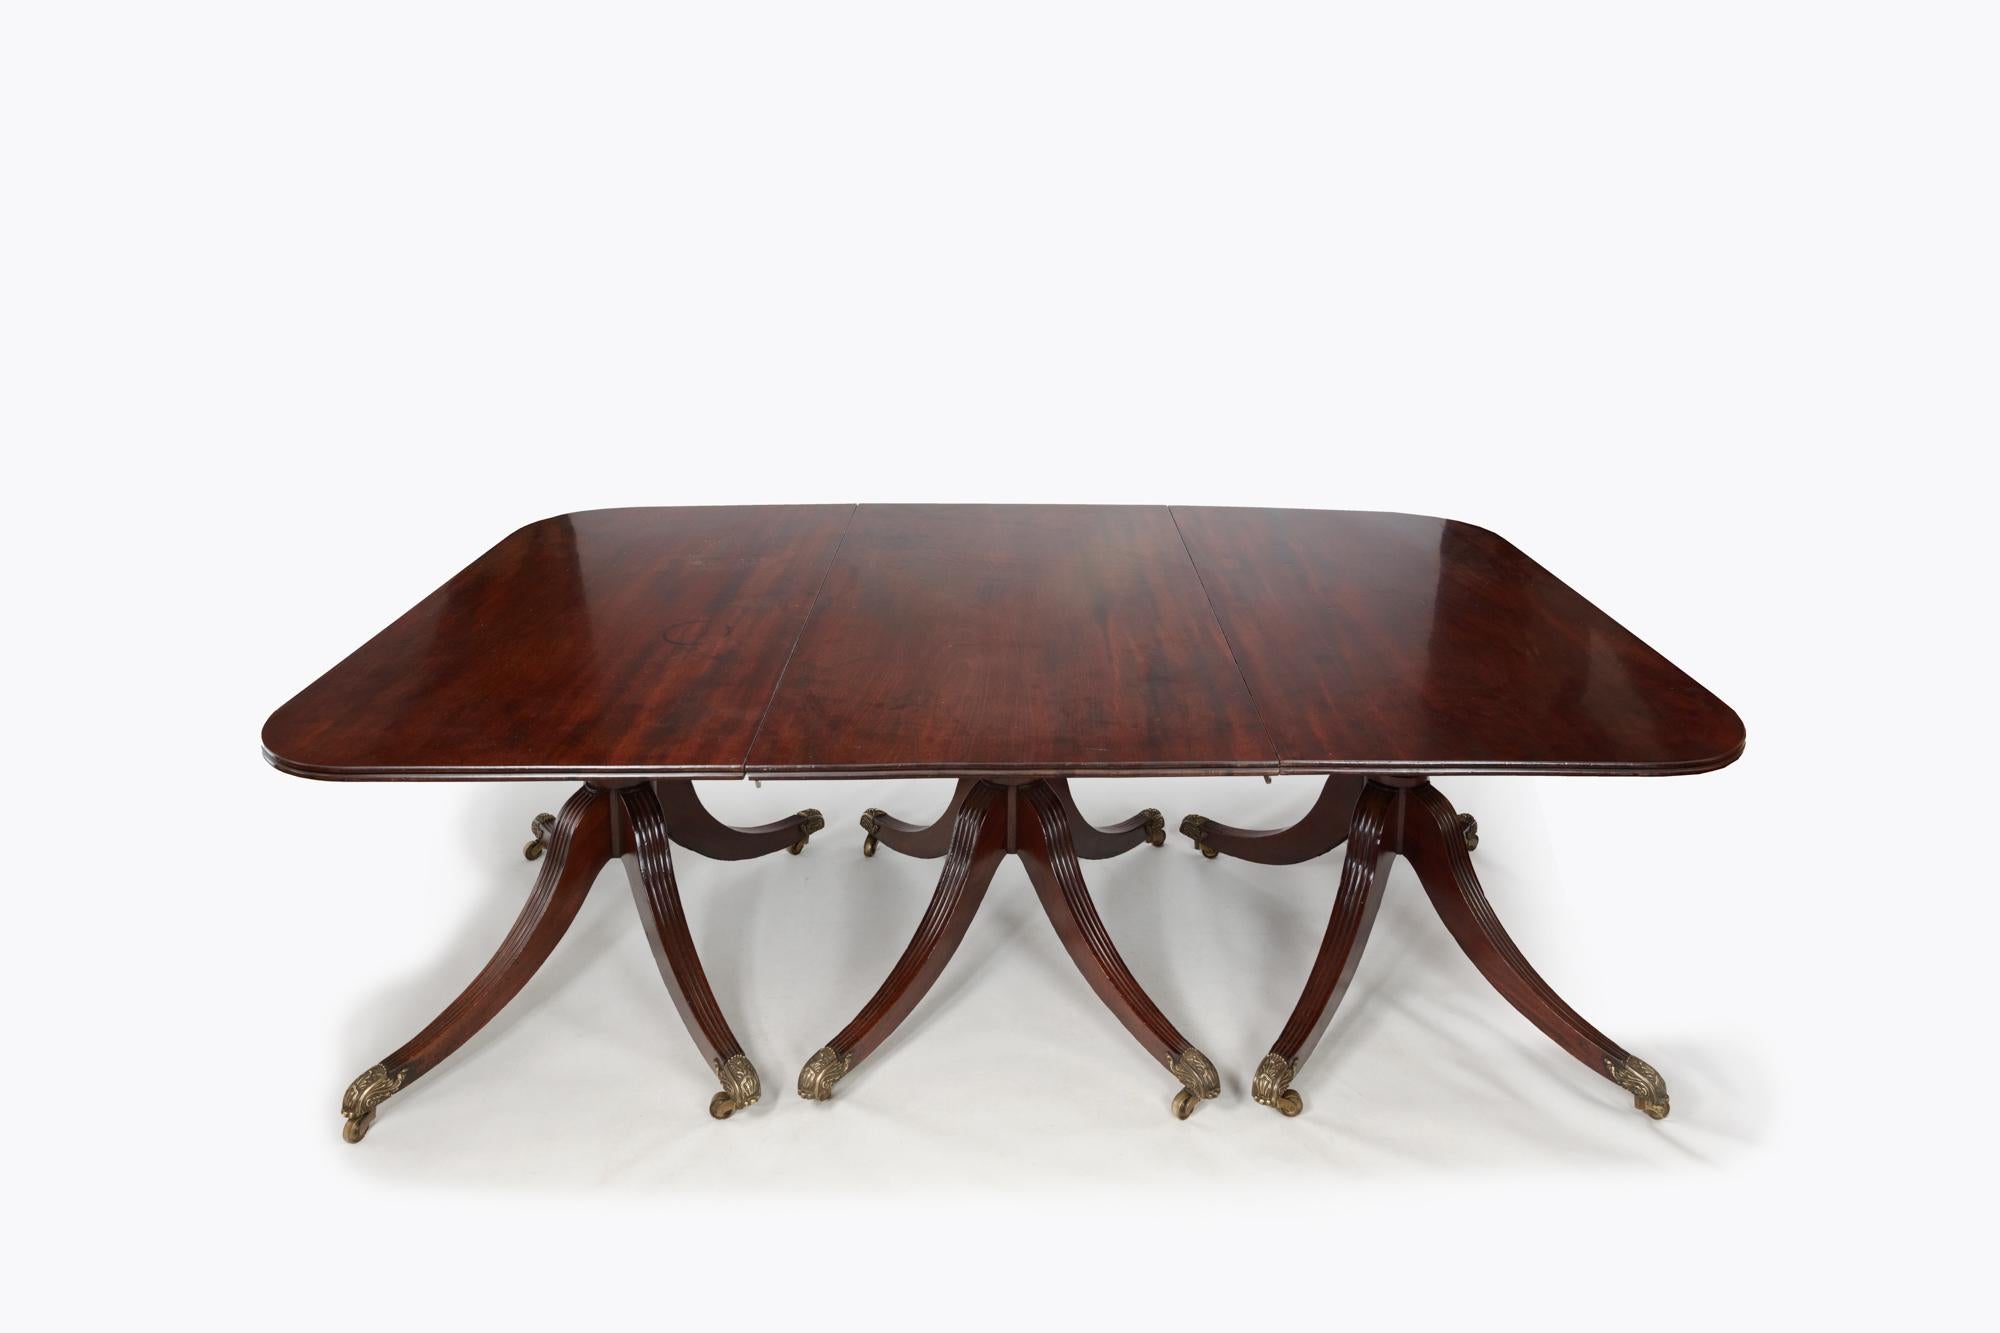 Early 19th Century English Regency Dining Table In Excellent Condition For Sale In Dublin 8, IE